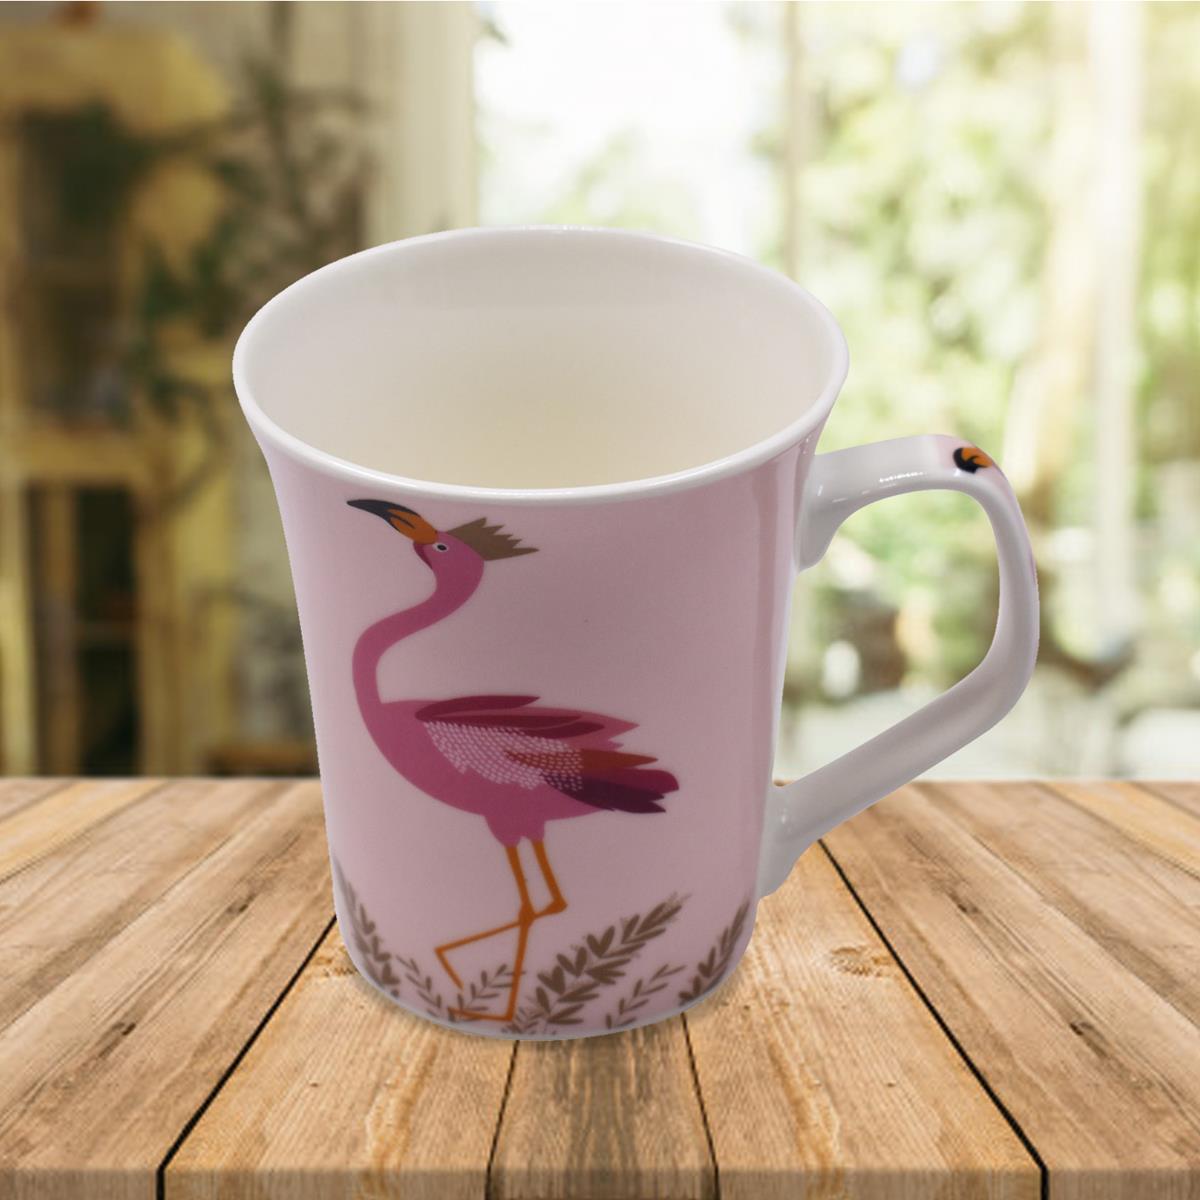 Kookee Printed Ceramic Tall Coffee or Tea Mug with handle for Office, Home or Gifting - 325ml (4611-C-A)